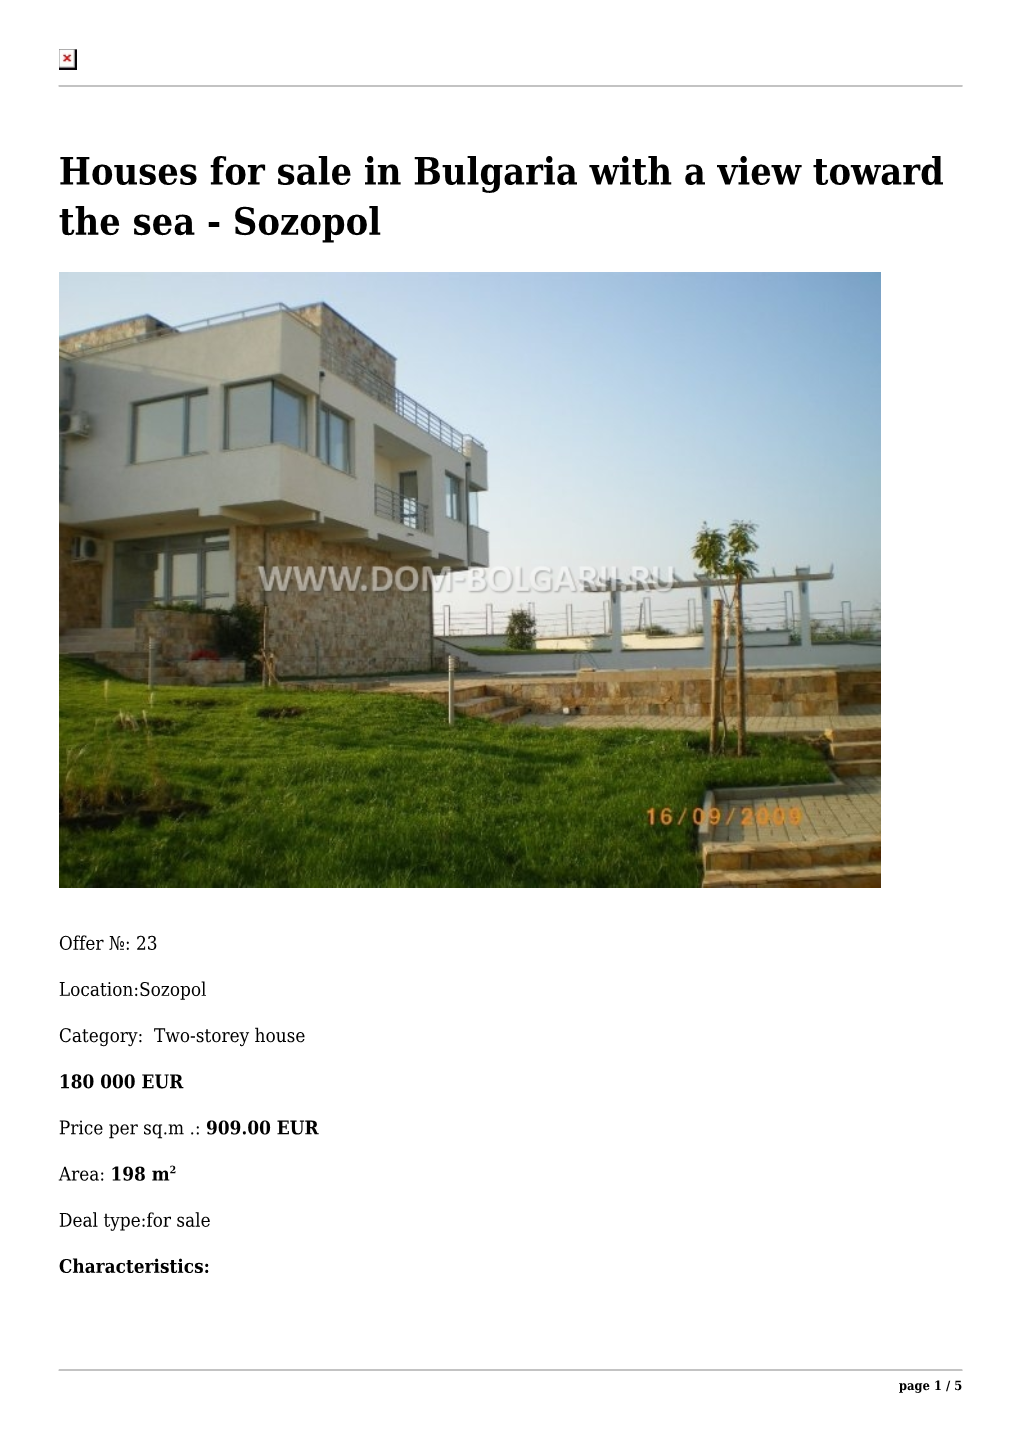 Houses for Sale in Bulgaria with a View Toward the Sea - Sozopol